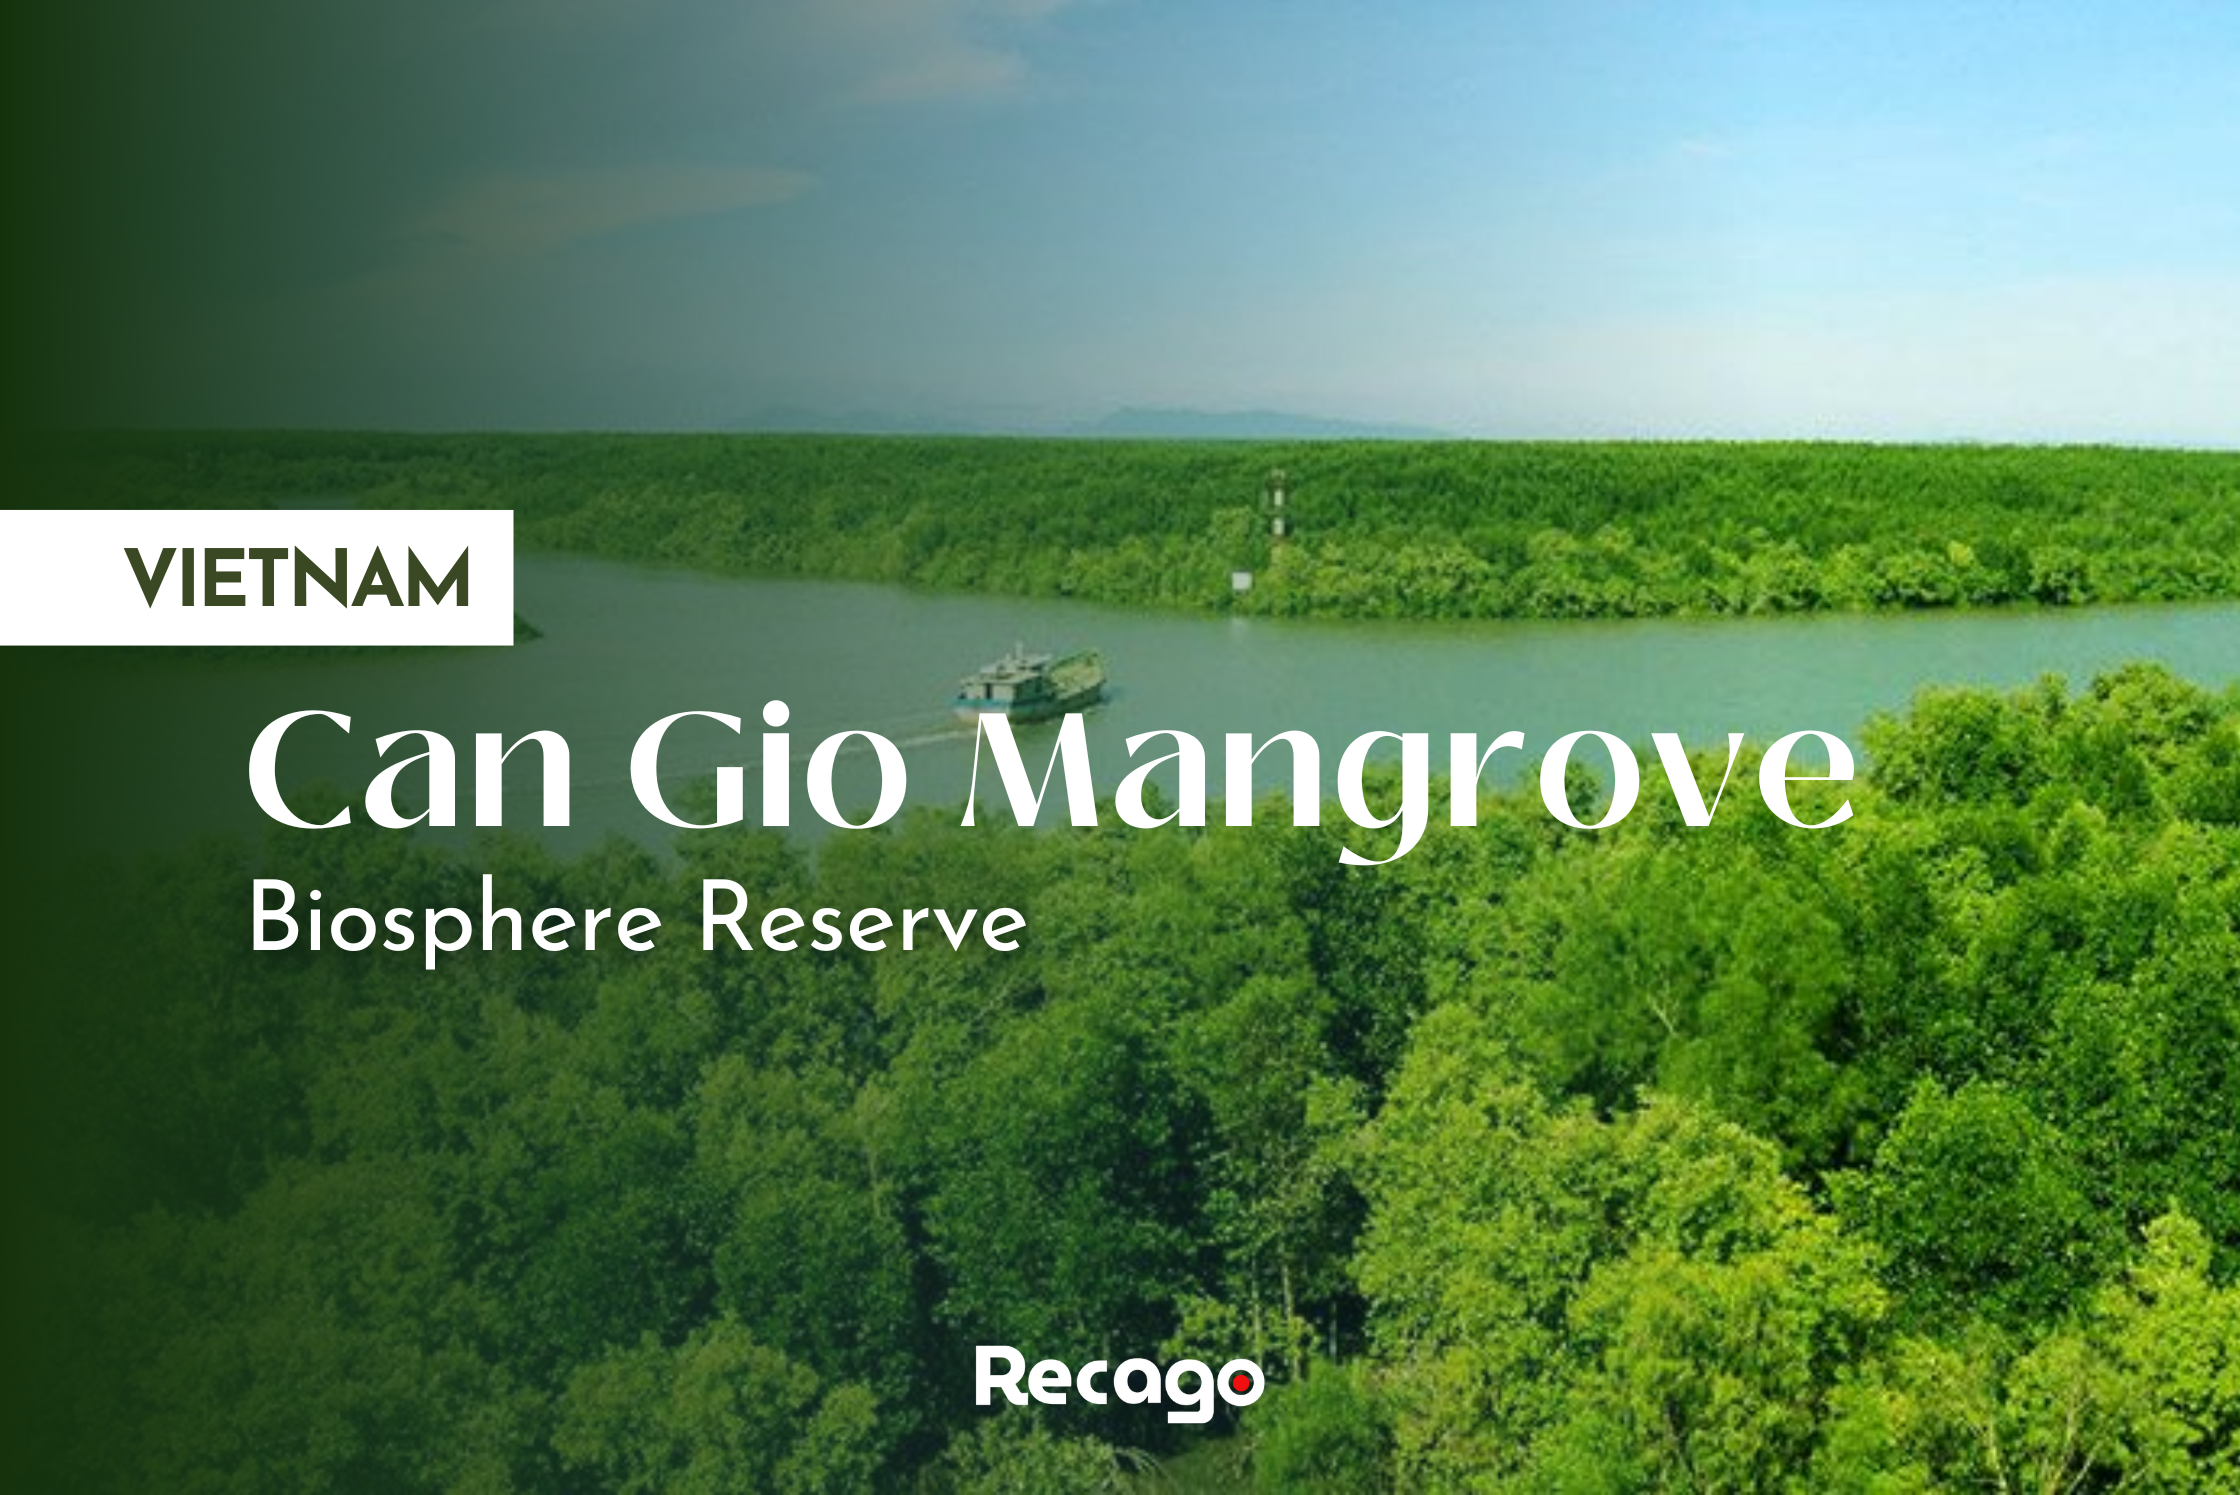 [VIETNAM TRAVEL] An experience to “Island of paradise” – Can Gio Mangrove Biosphere Reserve